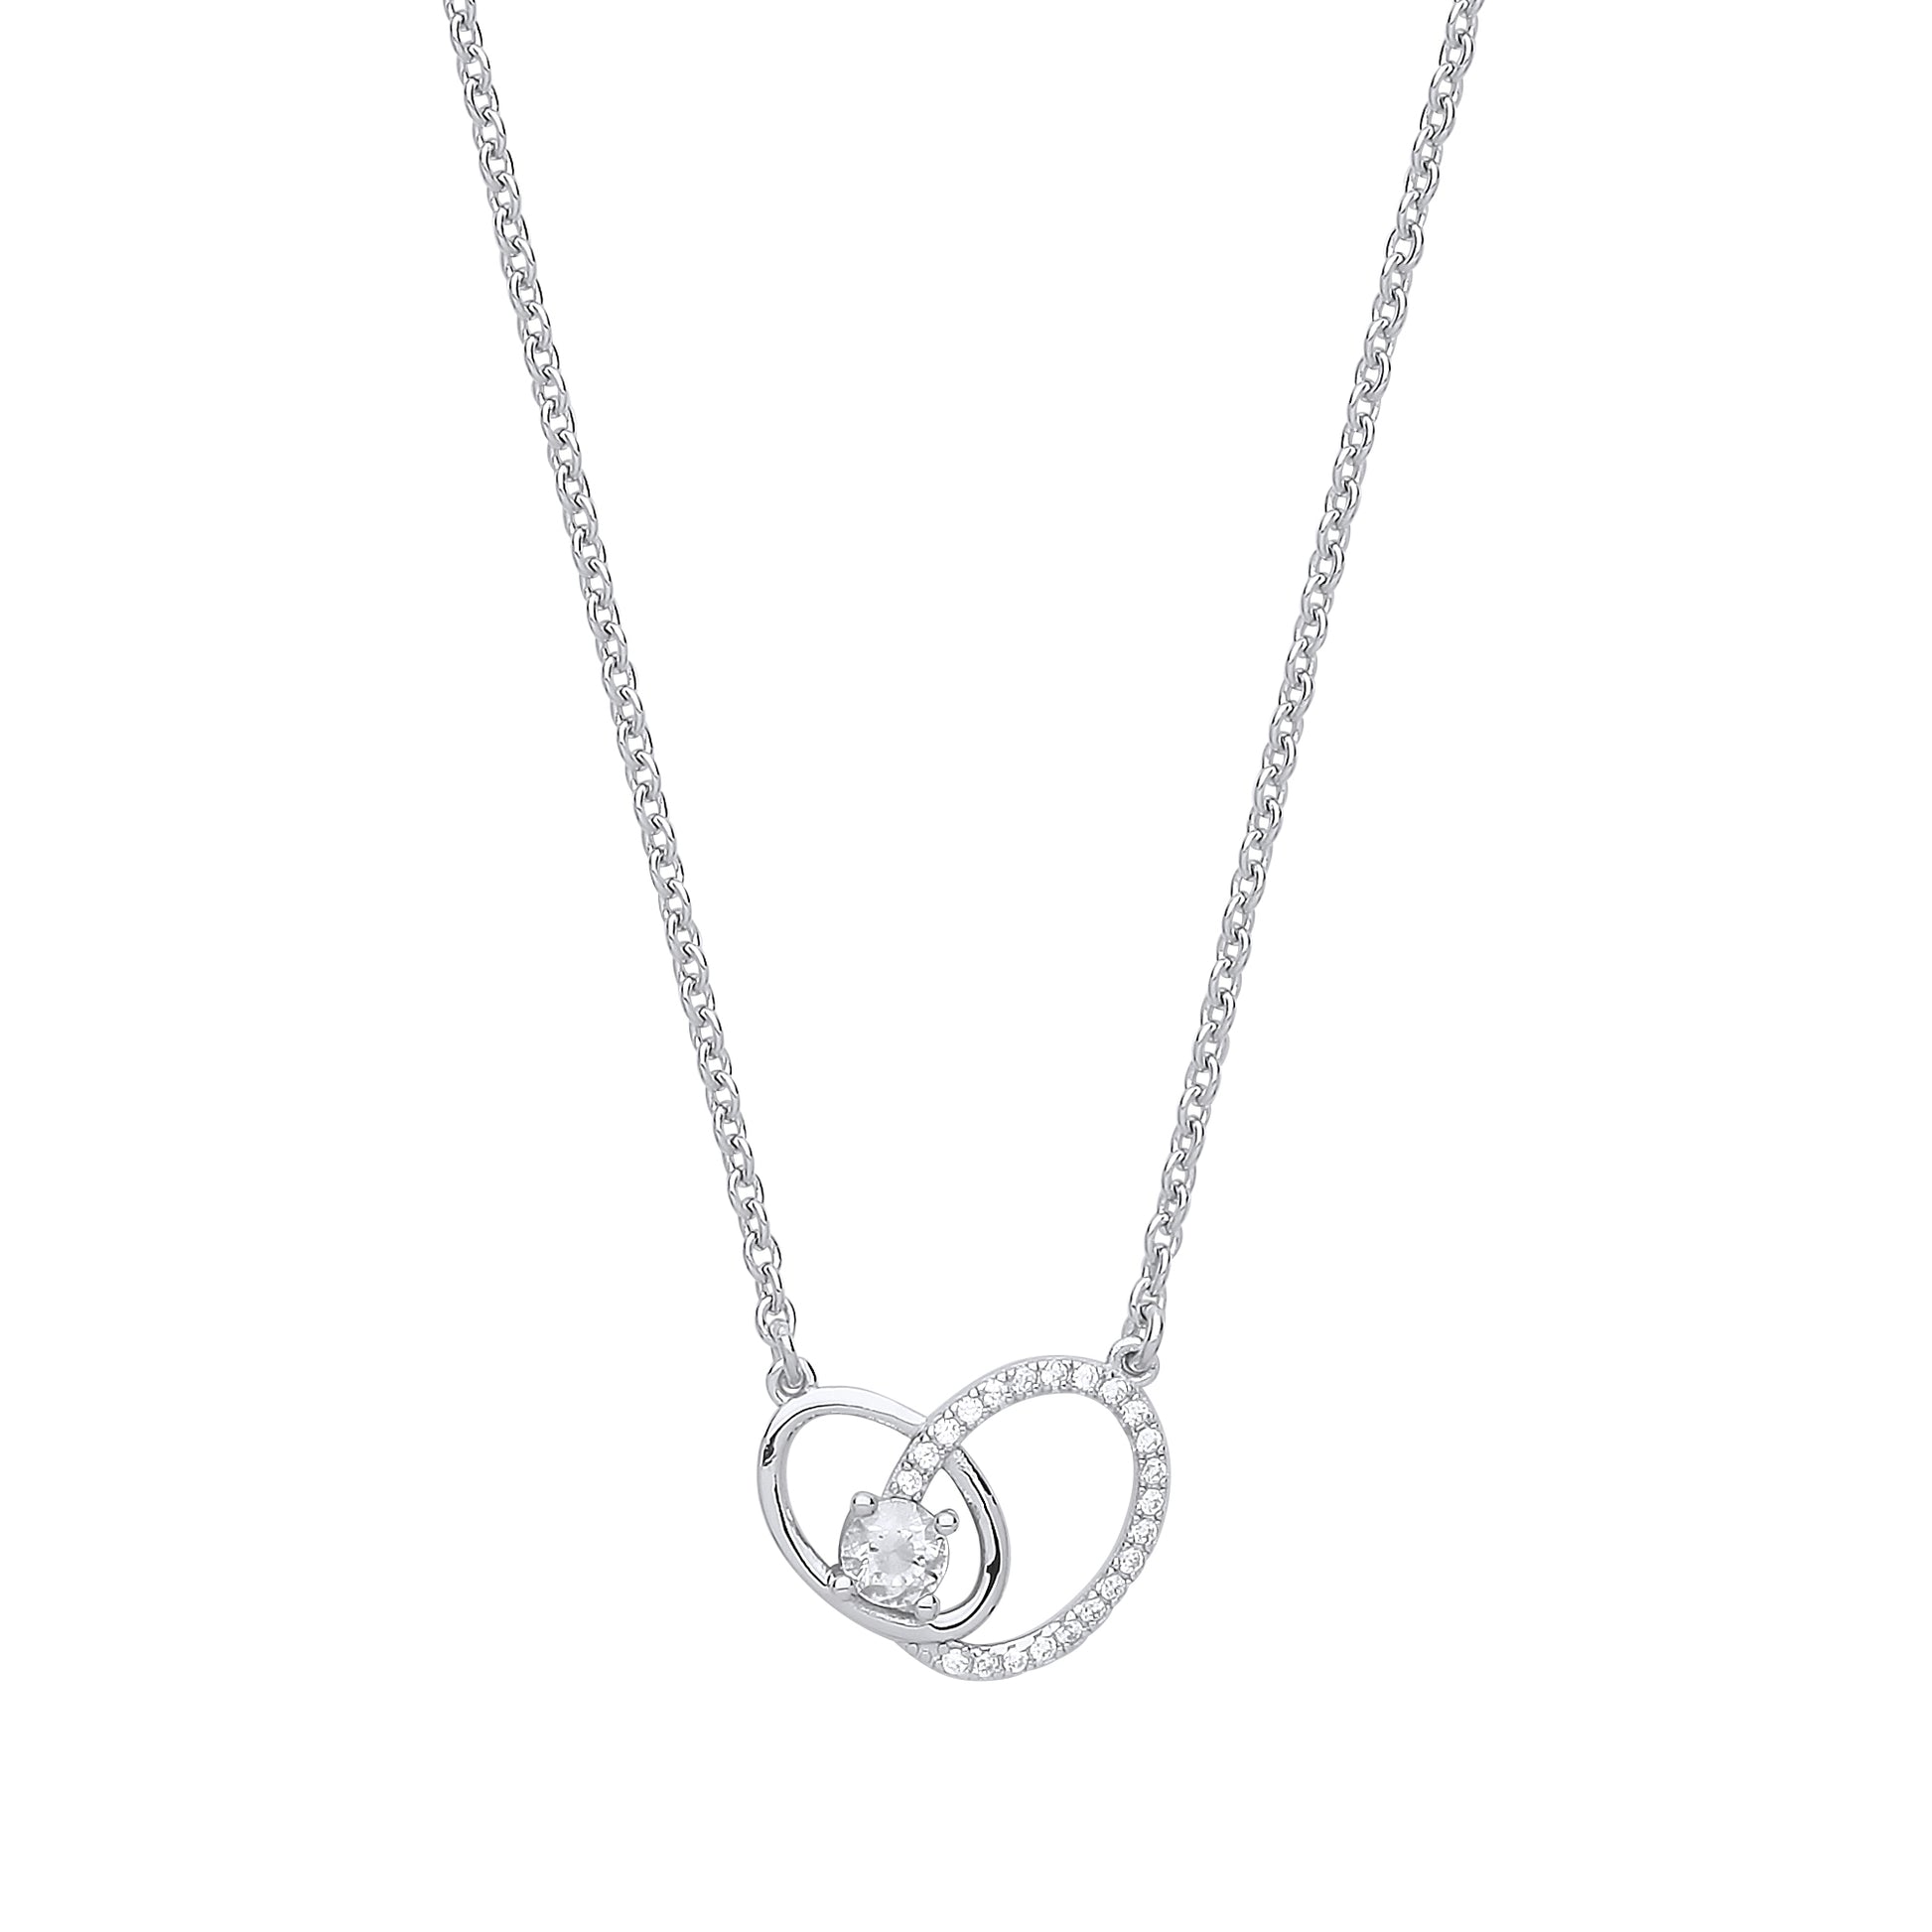 Silver  CZ Oval Solitaire Halo Charm Necklace 16 inch - GVK314